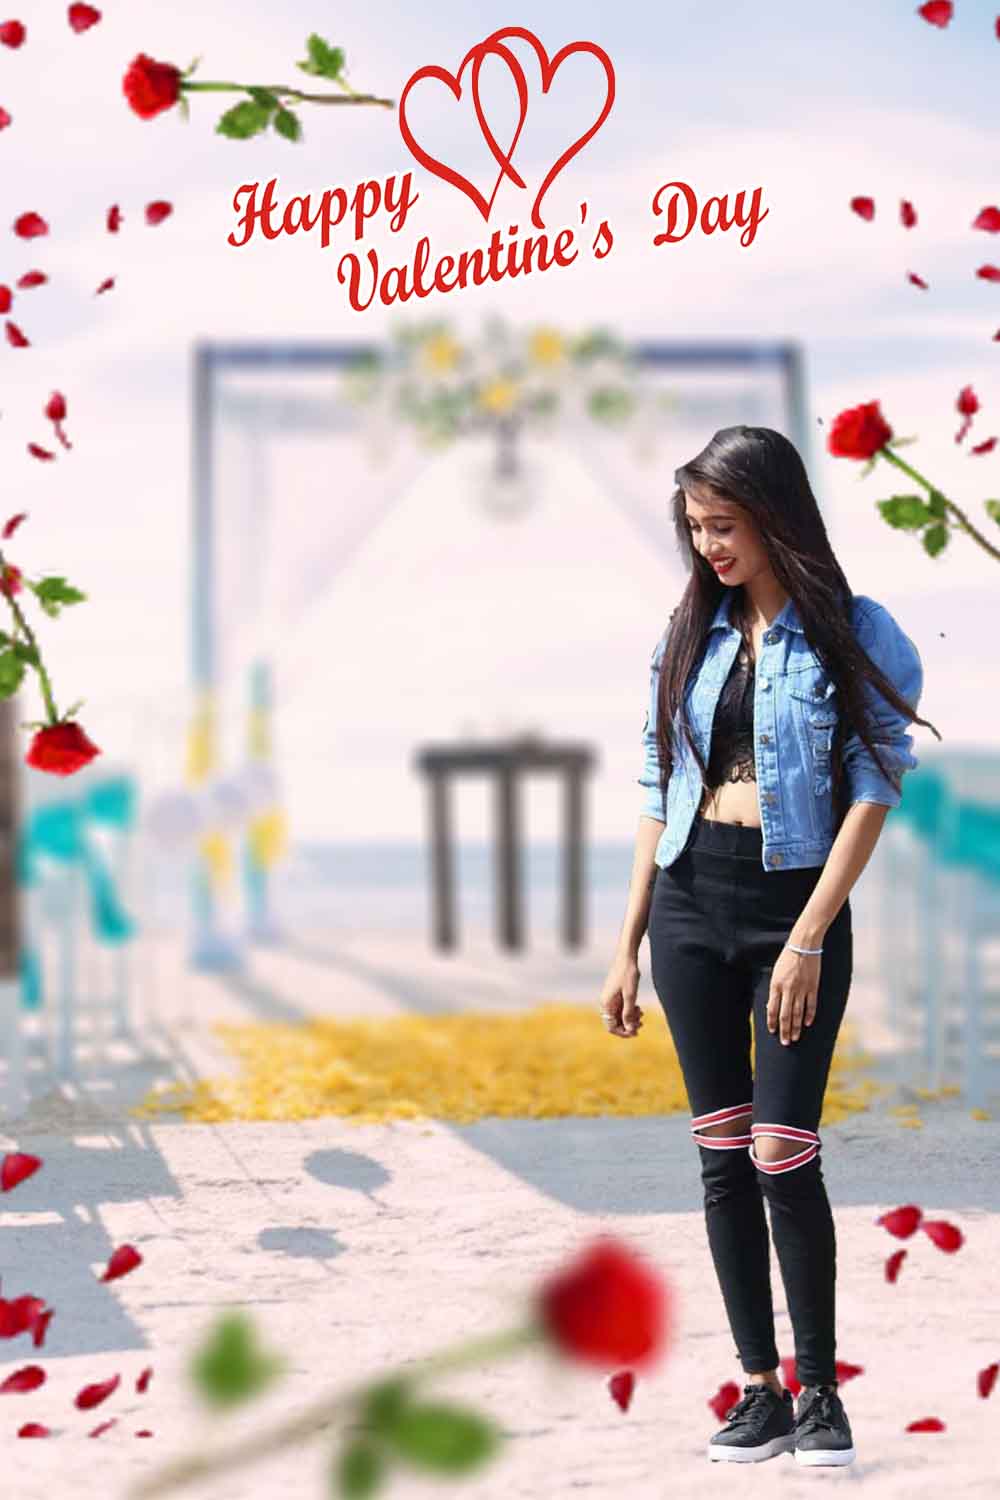 500+ Valentine's Day Special Photo Editing Background Images Hd | Happy Valentine's Day Photo Editing Background 2021